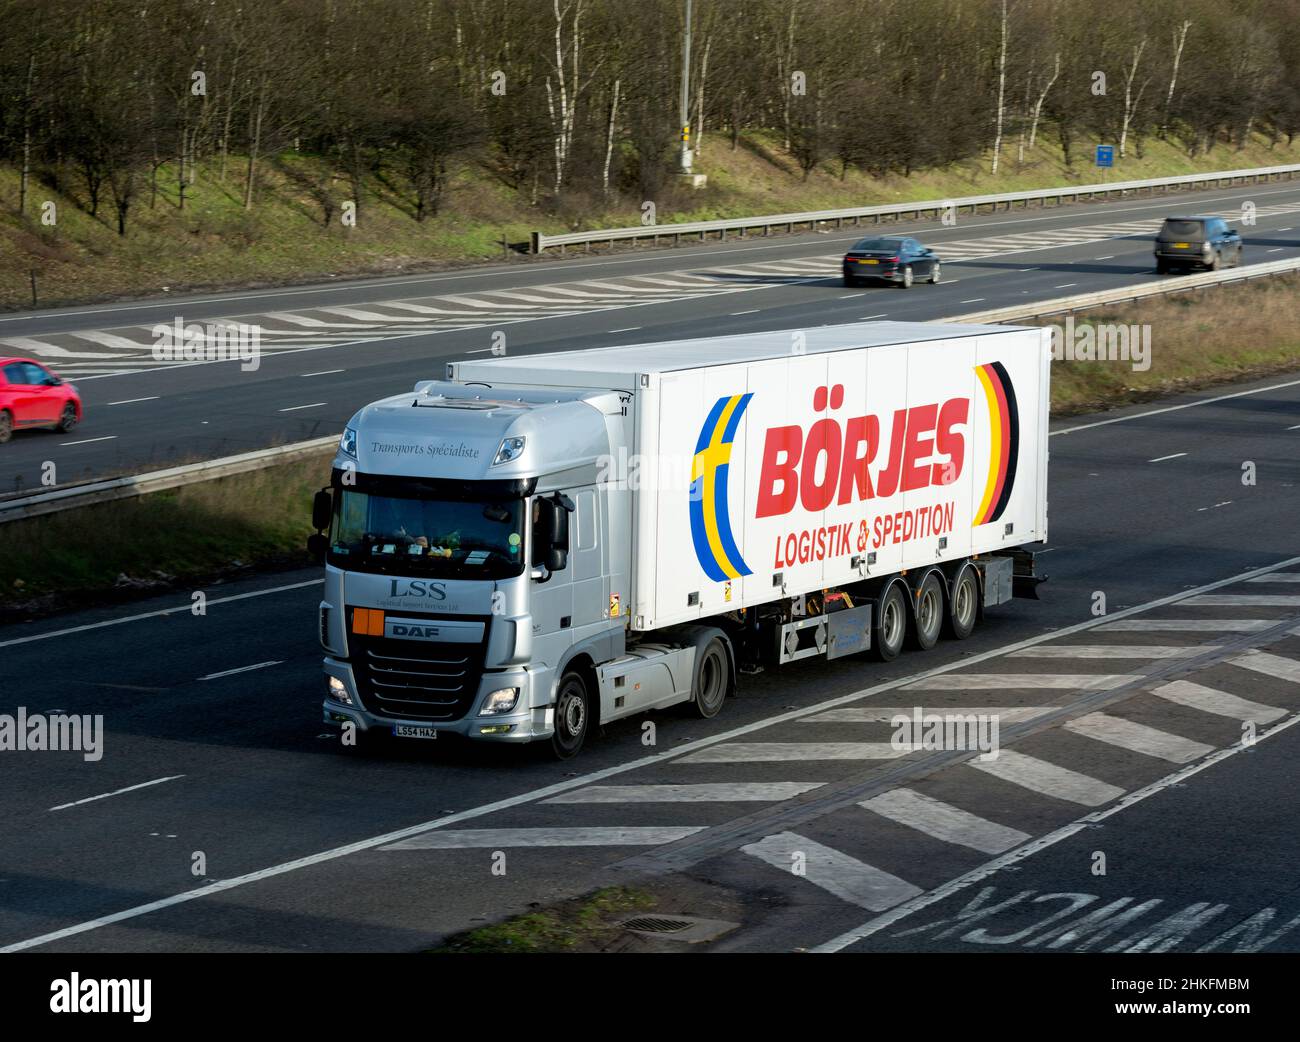 LSS lorry cab with a Borjes trailer, M40 motorway, Warwickshire, UK Stock Photo